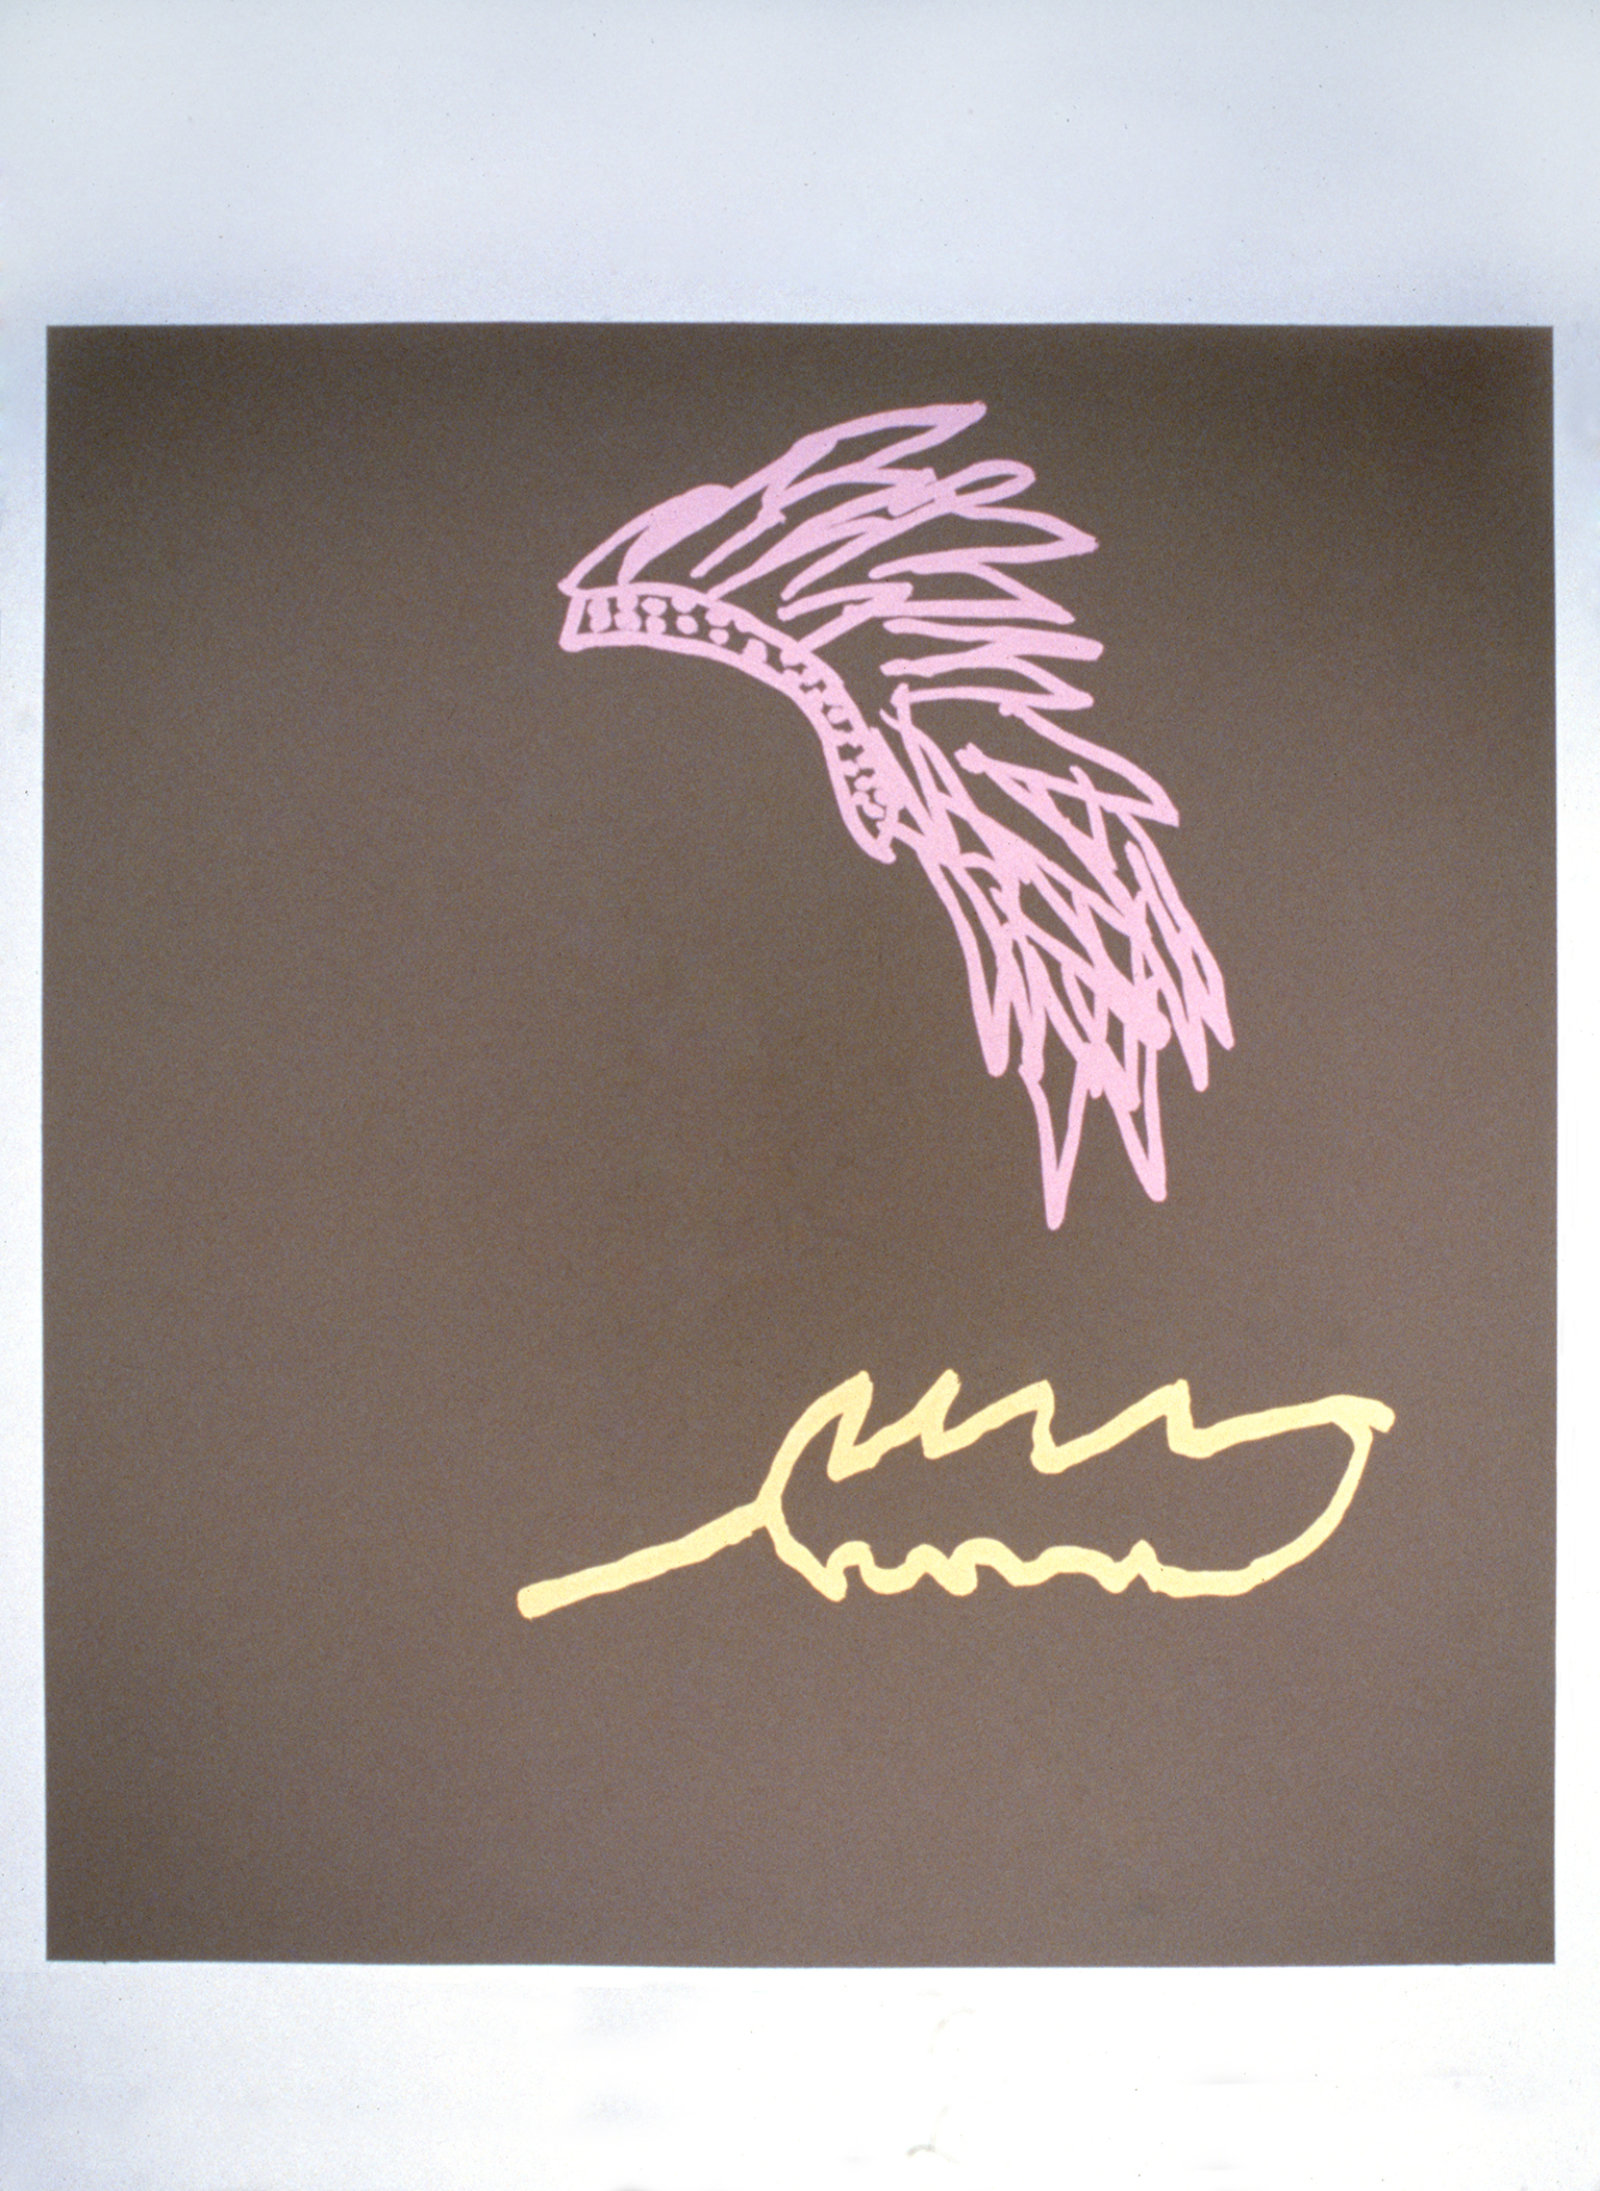 Brian Jungen, Anonymous Drawings (Feathers), 1997, latex paint on wall, 98 x 118 in. (250 cm x 300 cm)